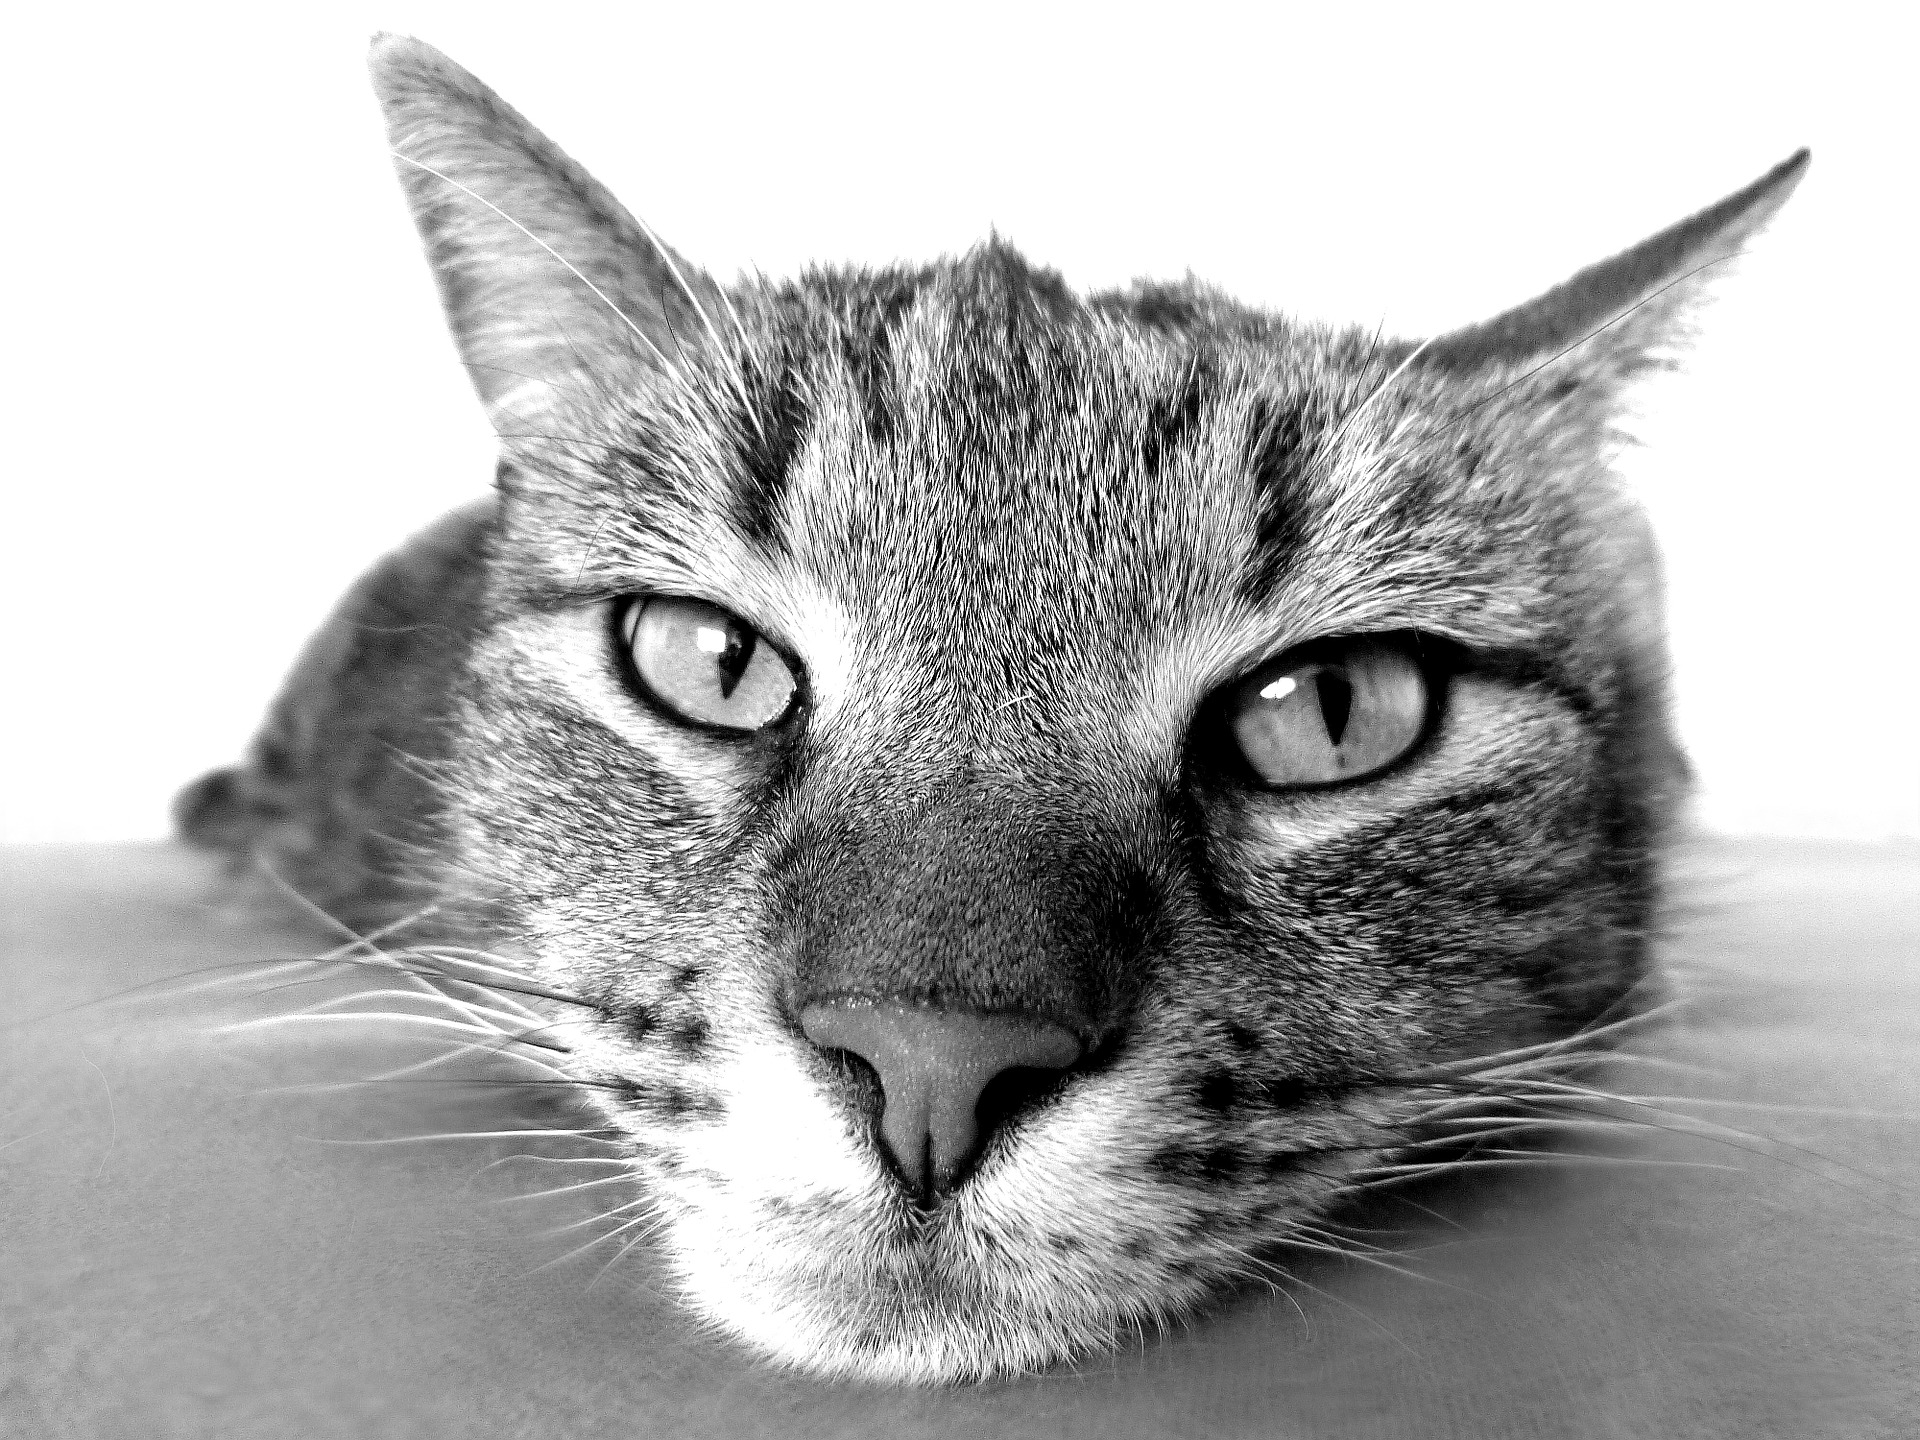 Common Health Problems for Senior Cats: What You Need to Know